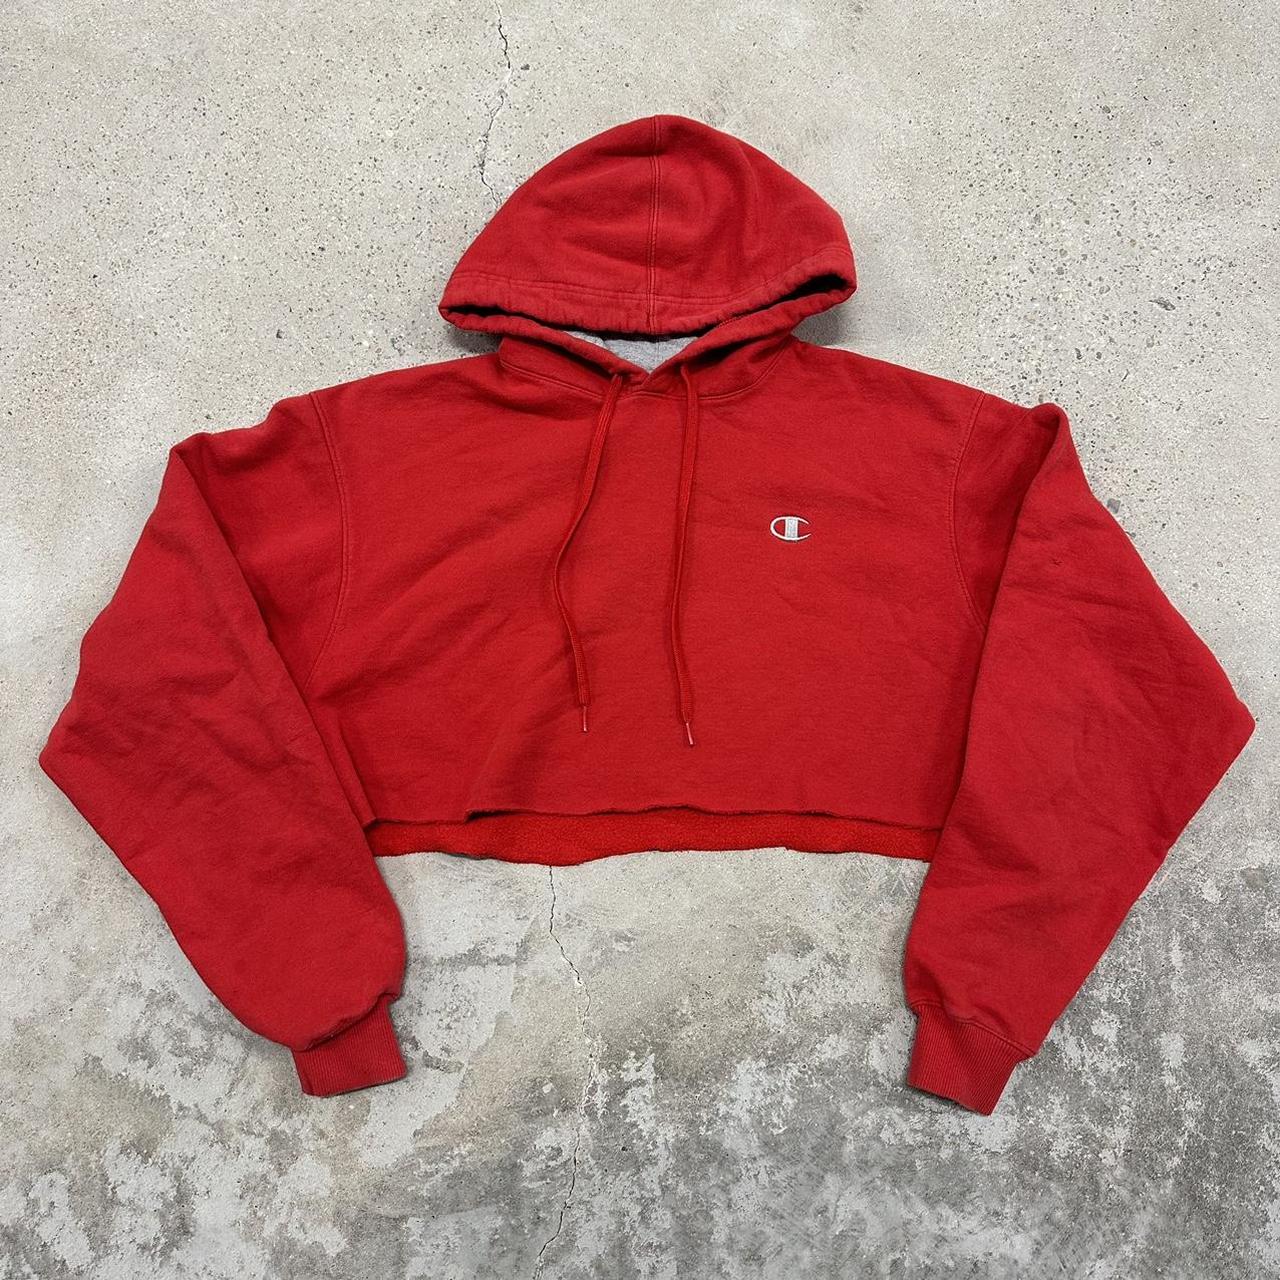 Red Champion Cropped Hoodie Size Large Cropped... - Depop